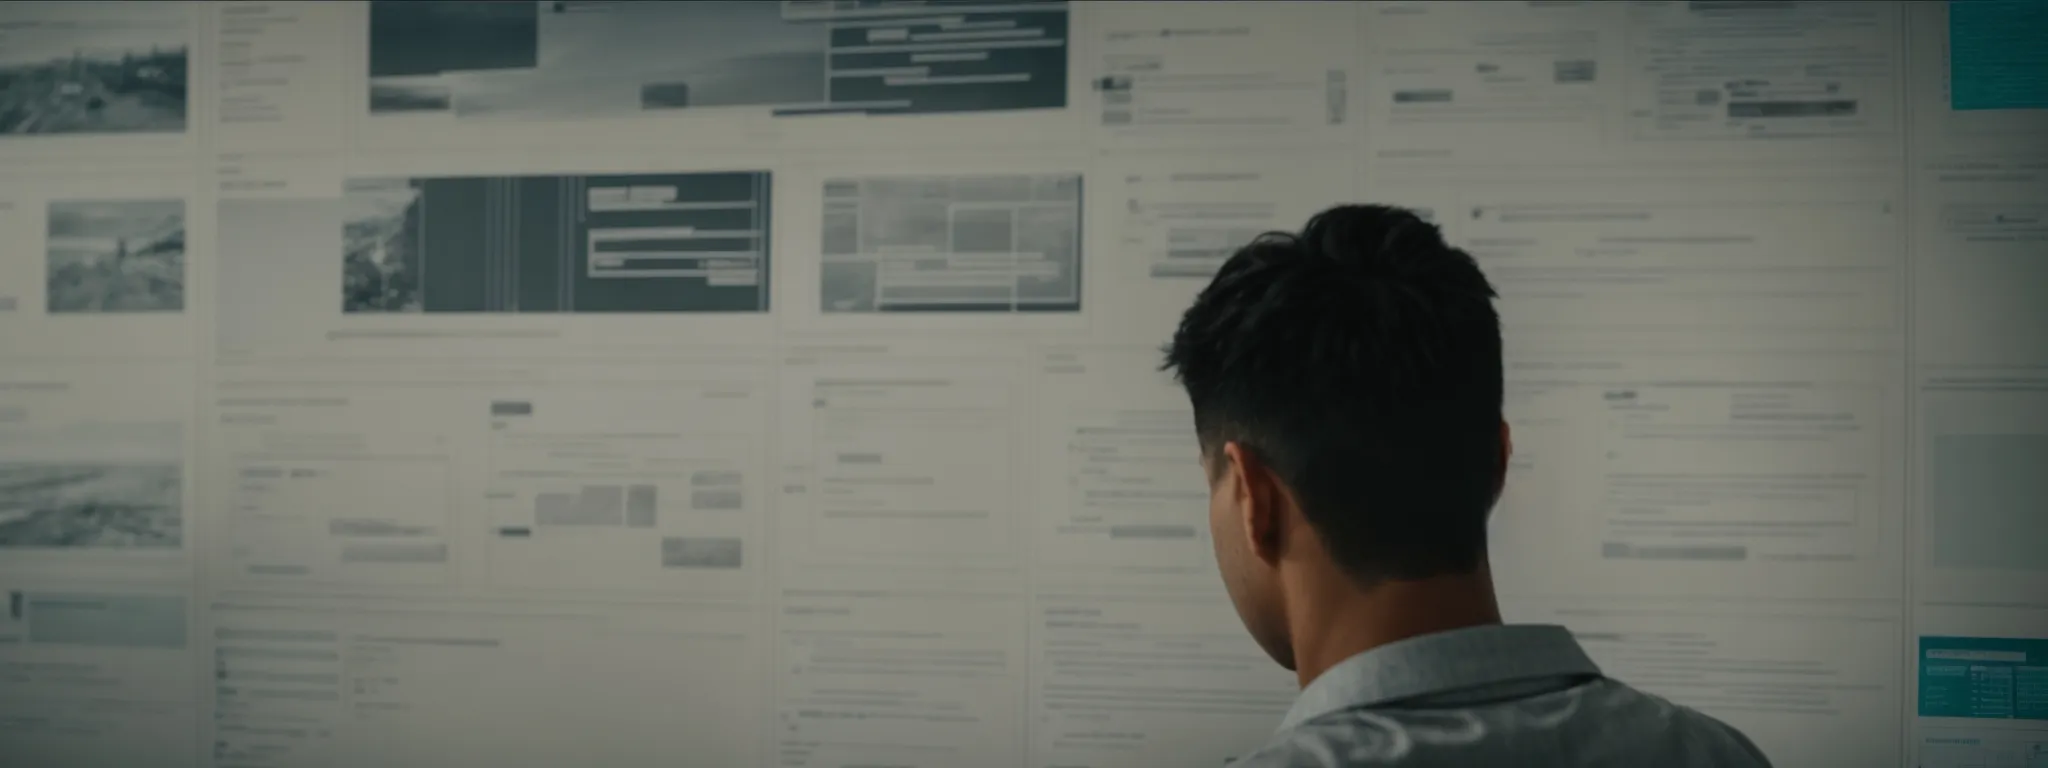 a webmaster intently maps out a website's structure on a digital storyboard, highlighting interconnected pages with lines.